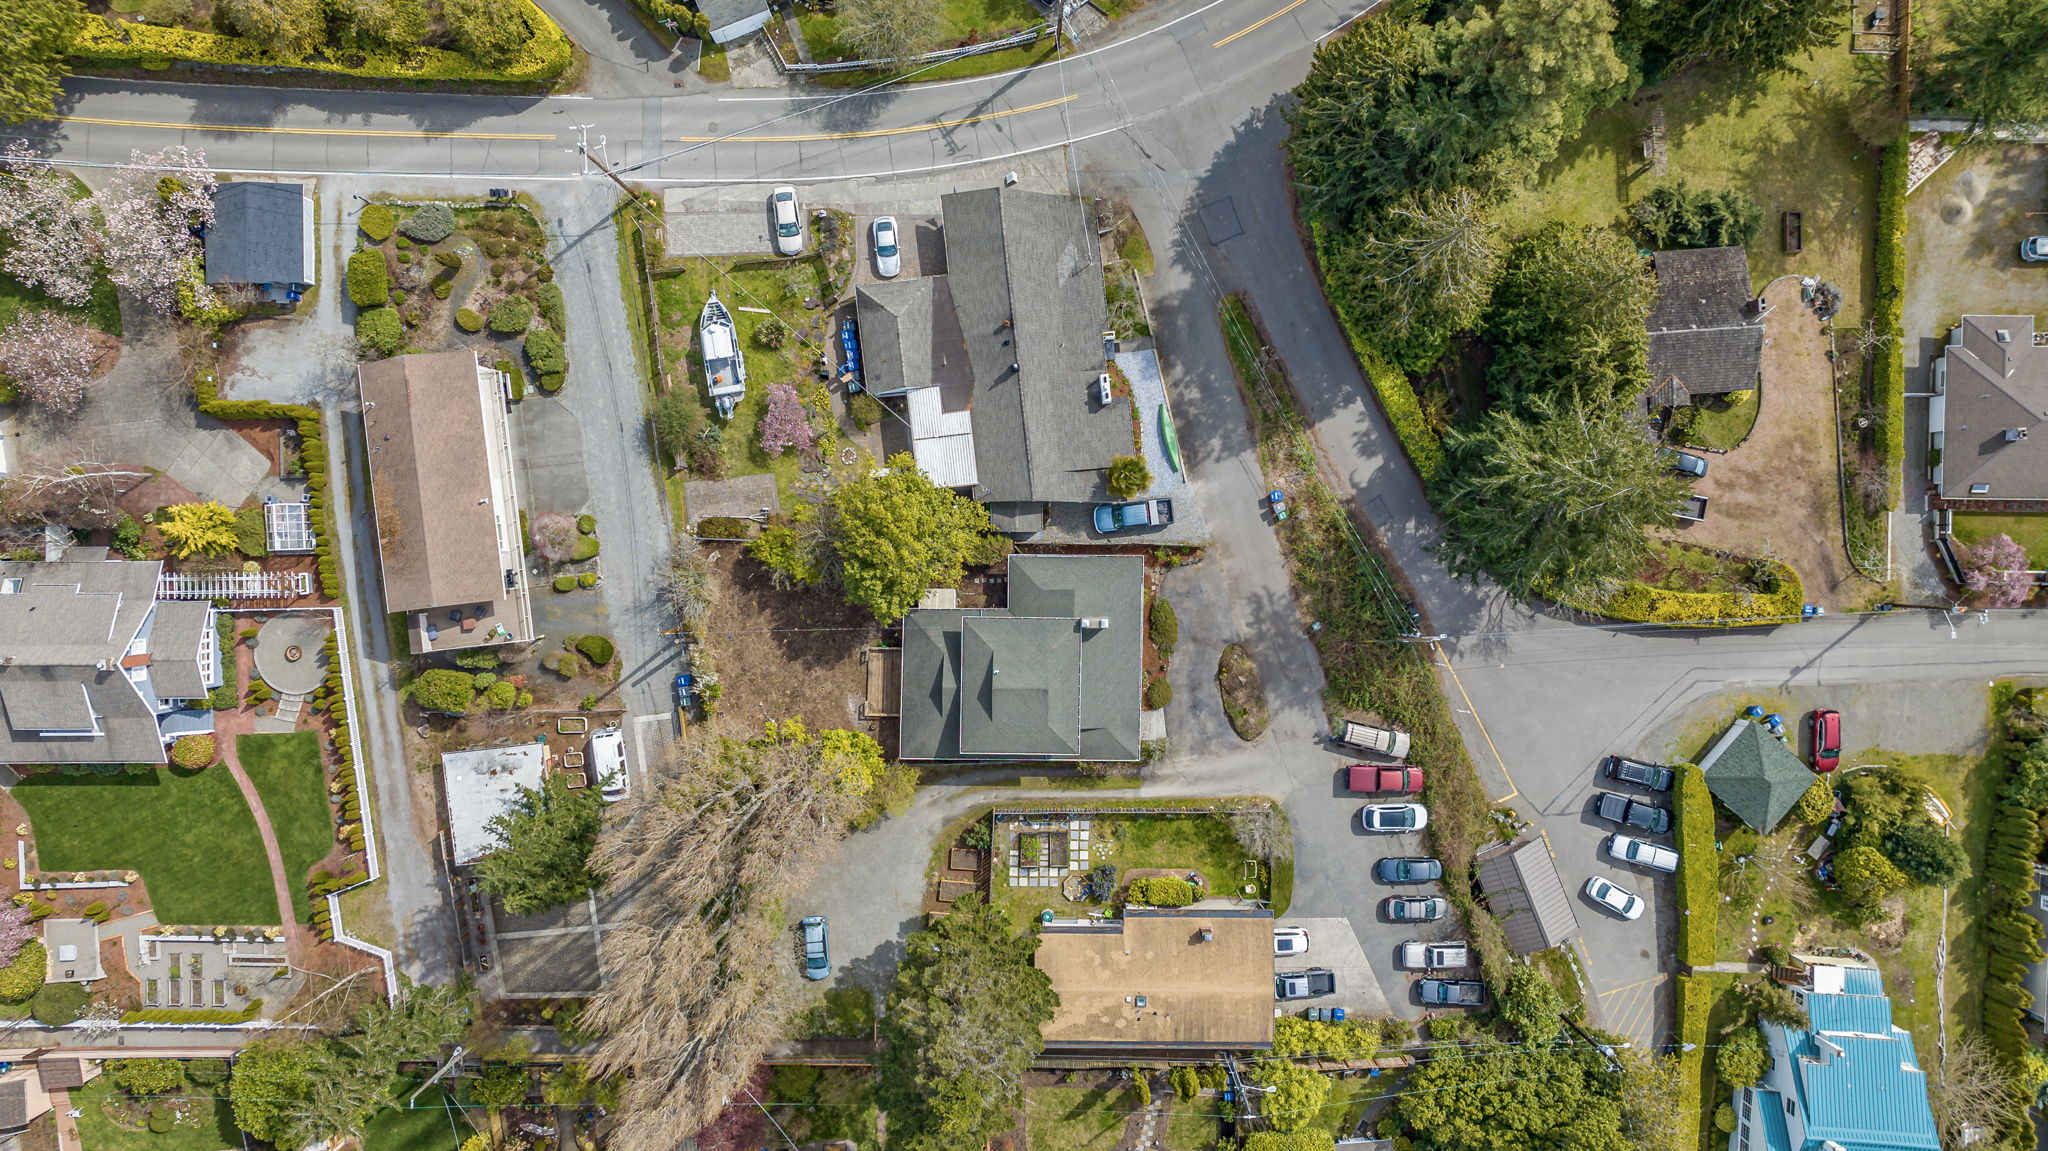 Ariel view of street & house